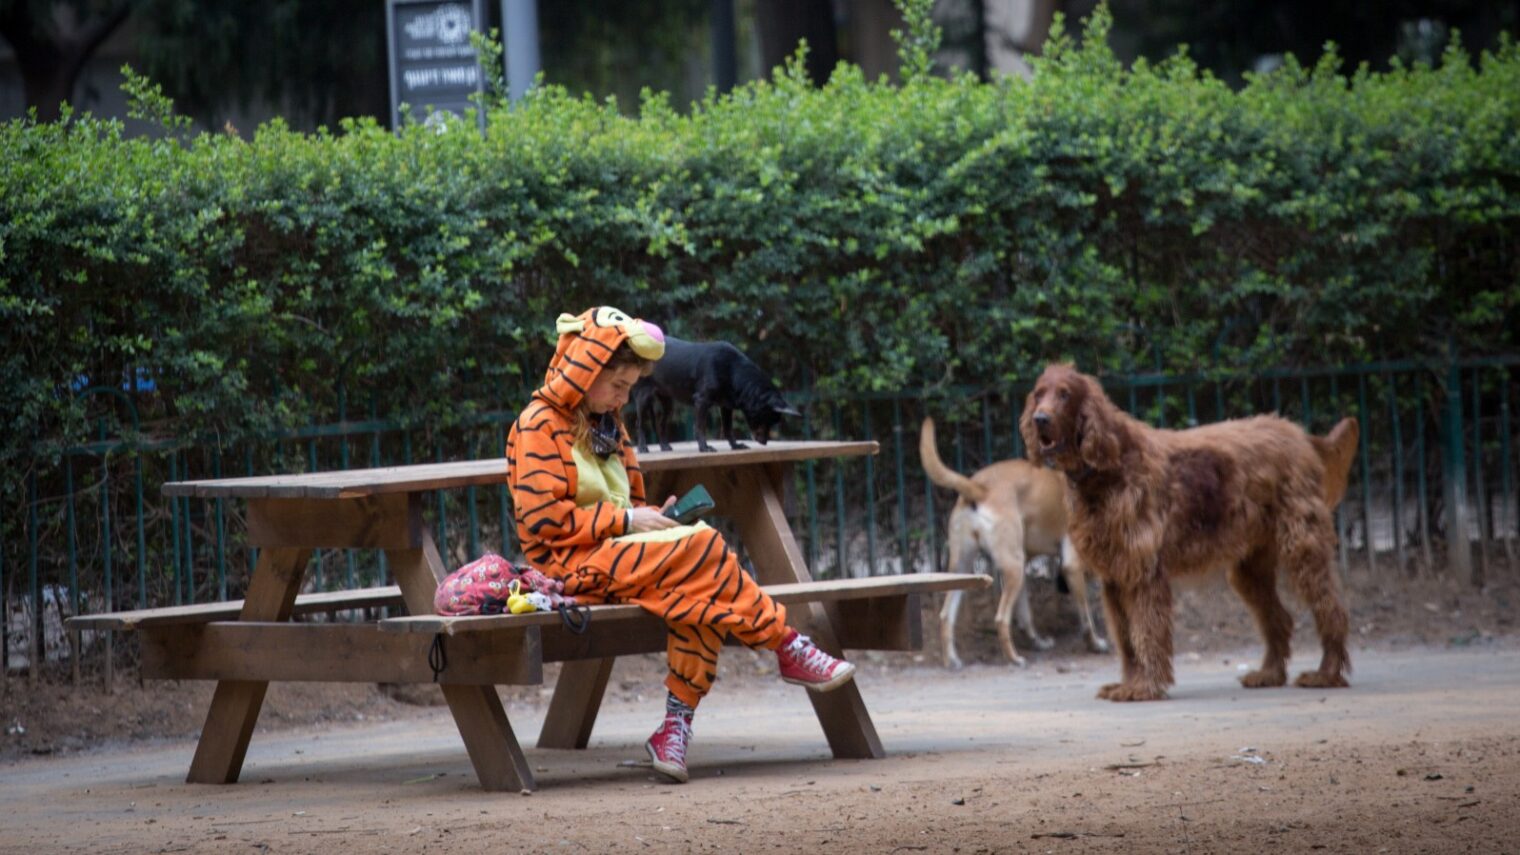 Scene at a dog park in Tel Aviv, March 1, 2021. Photo by Miriam Alster/FLASH90